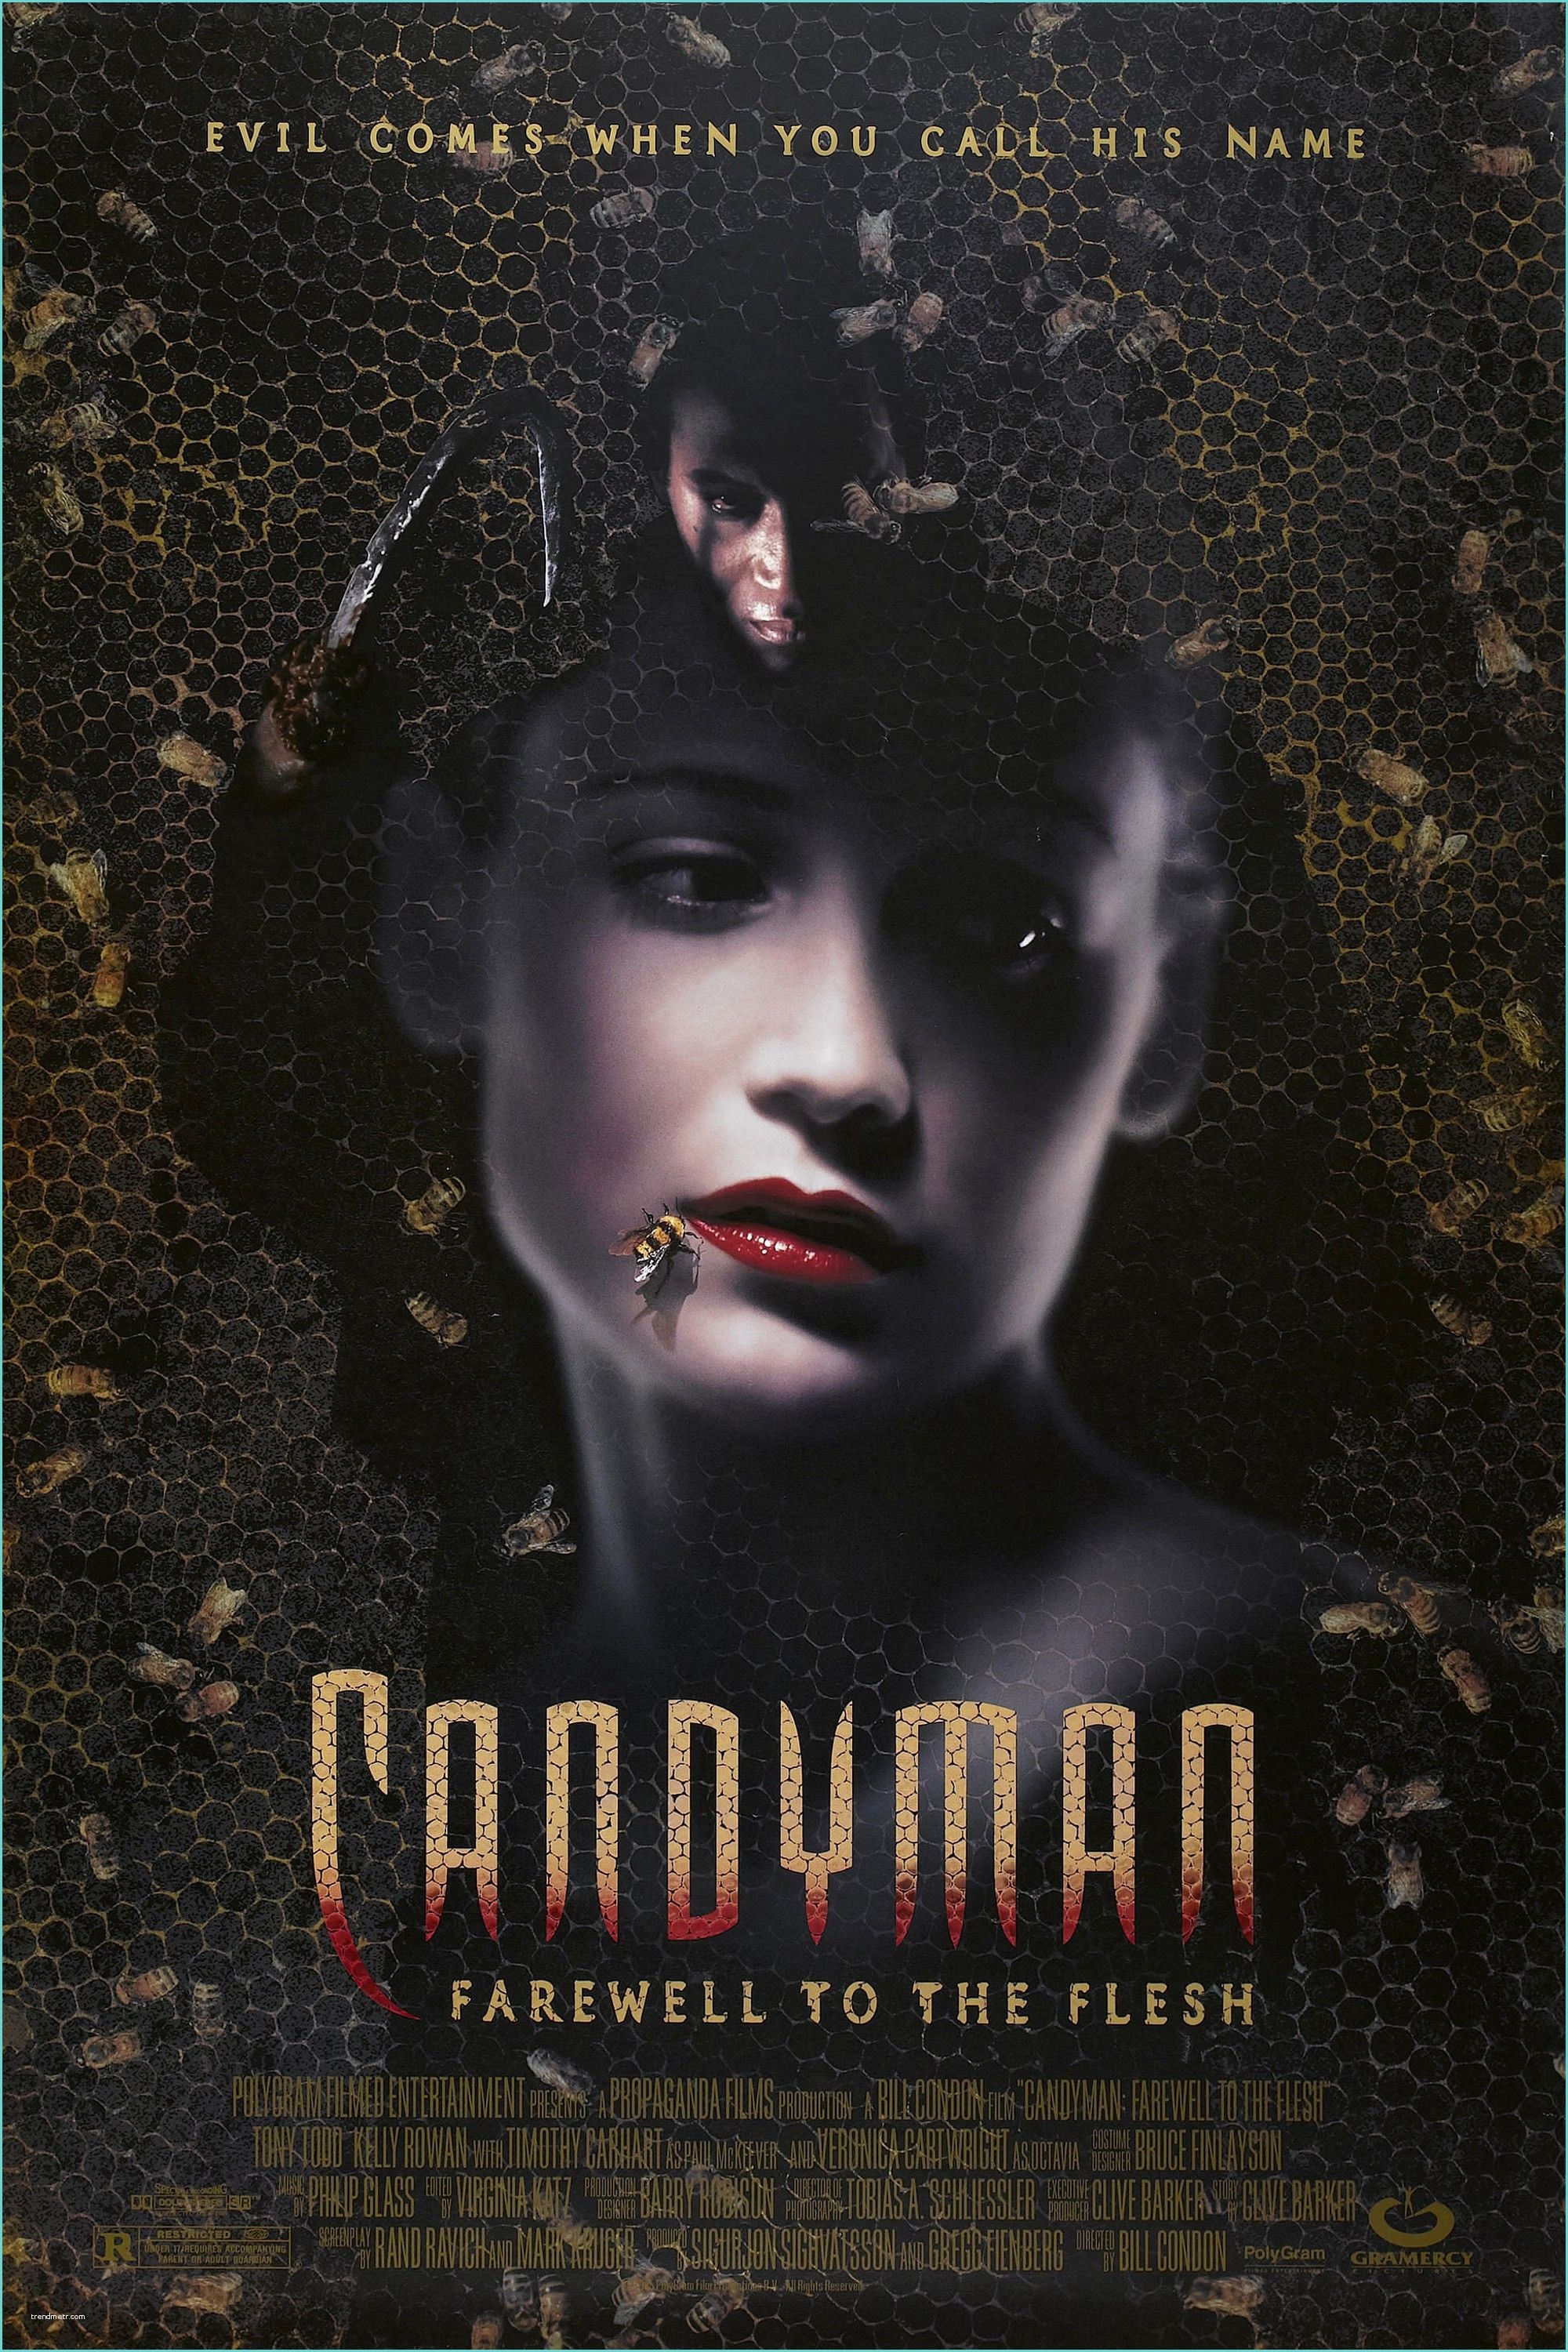 Allposters Return Policy Candyman Ii Farewell to the Flesh 1995